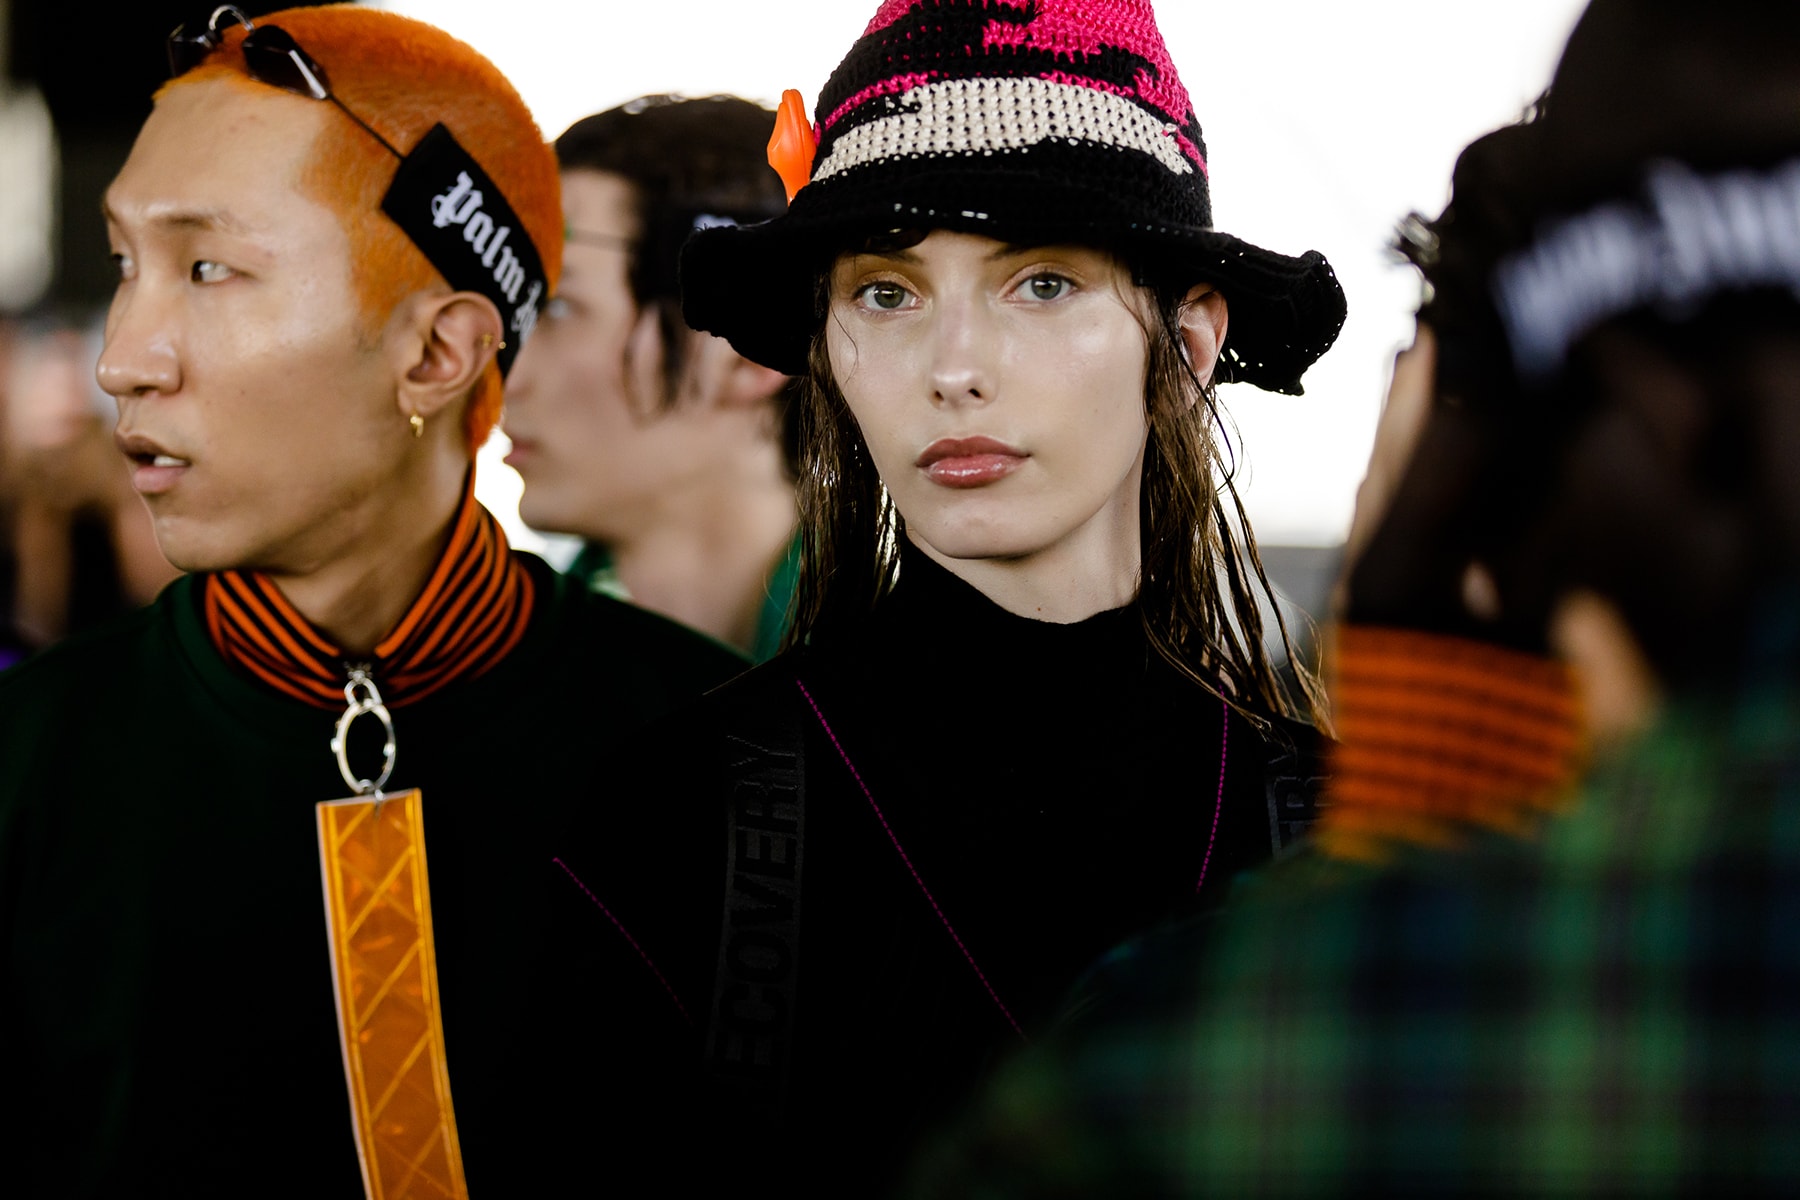 palm angels spring summer 2019 milan fashion week woven knit hat tanning bed glasses goggles orange tag neck zipper